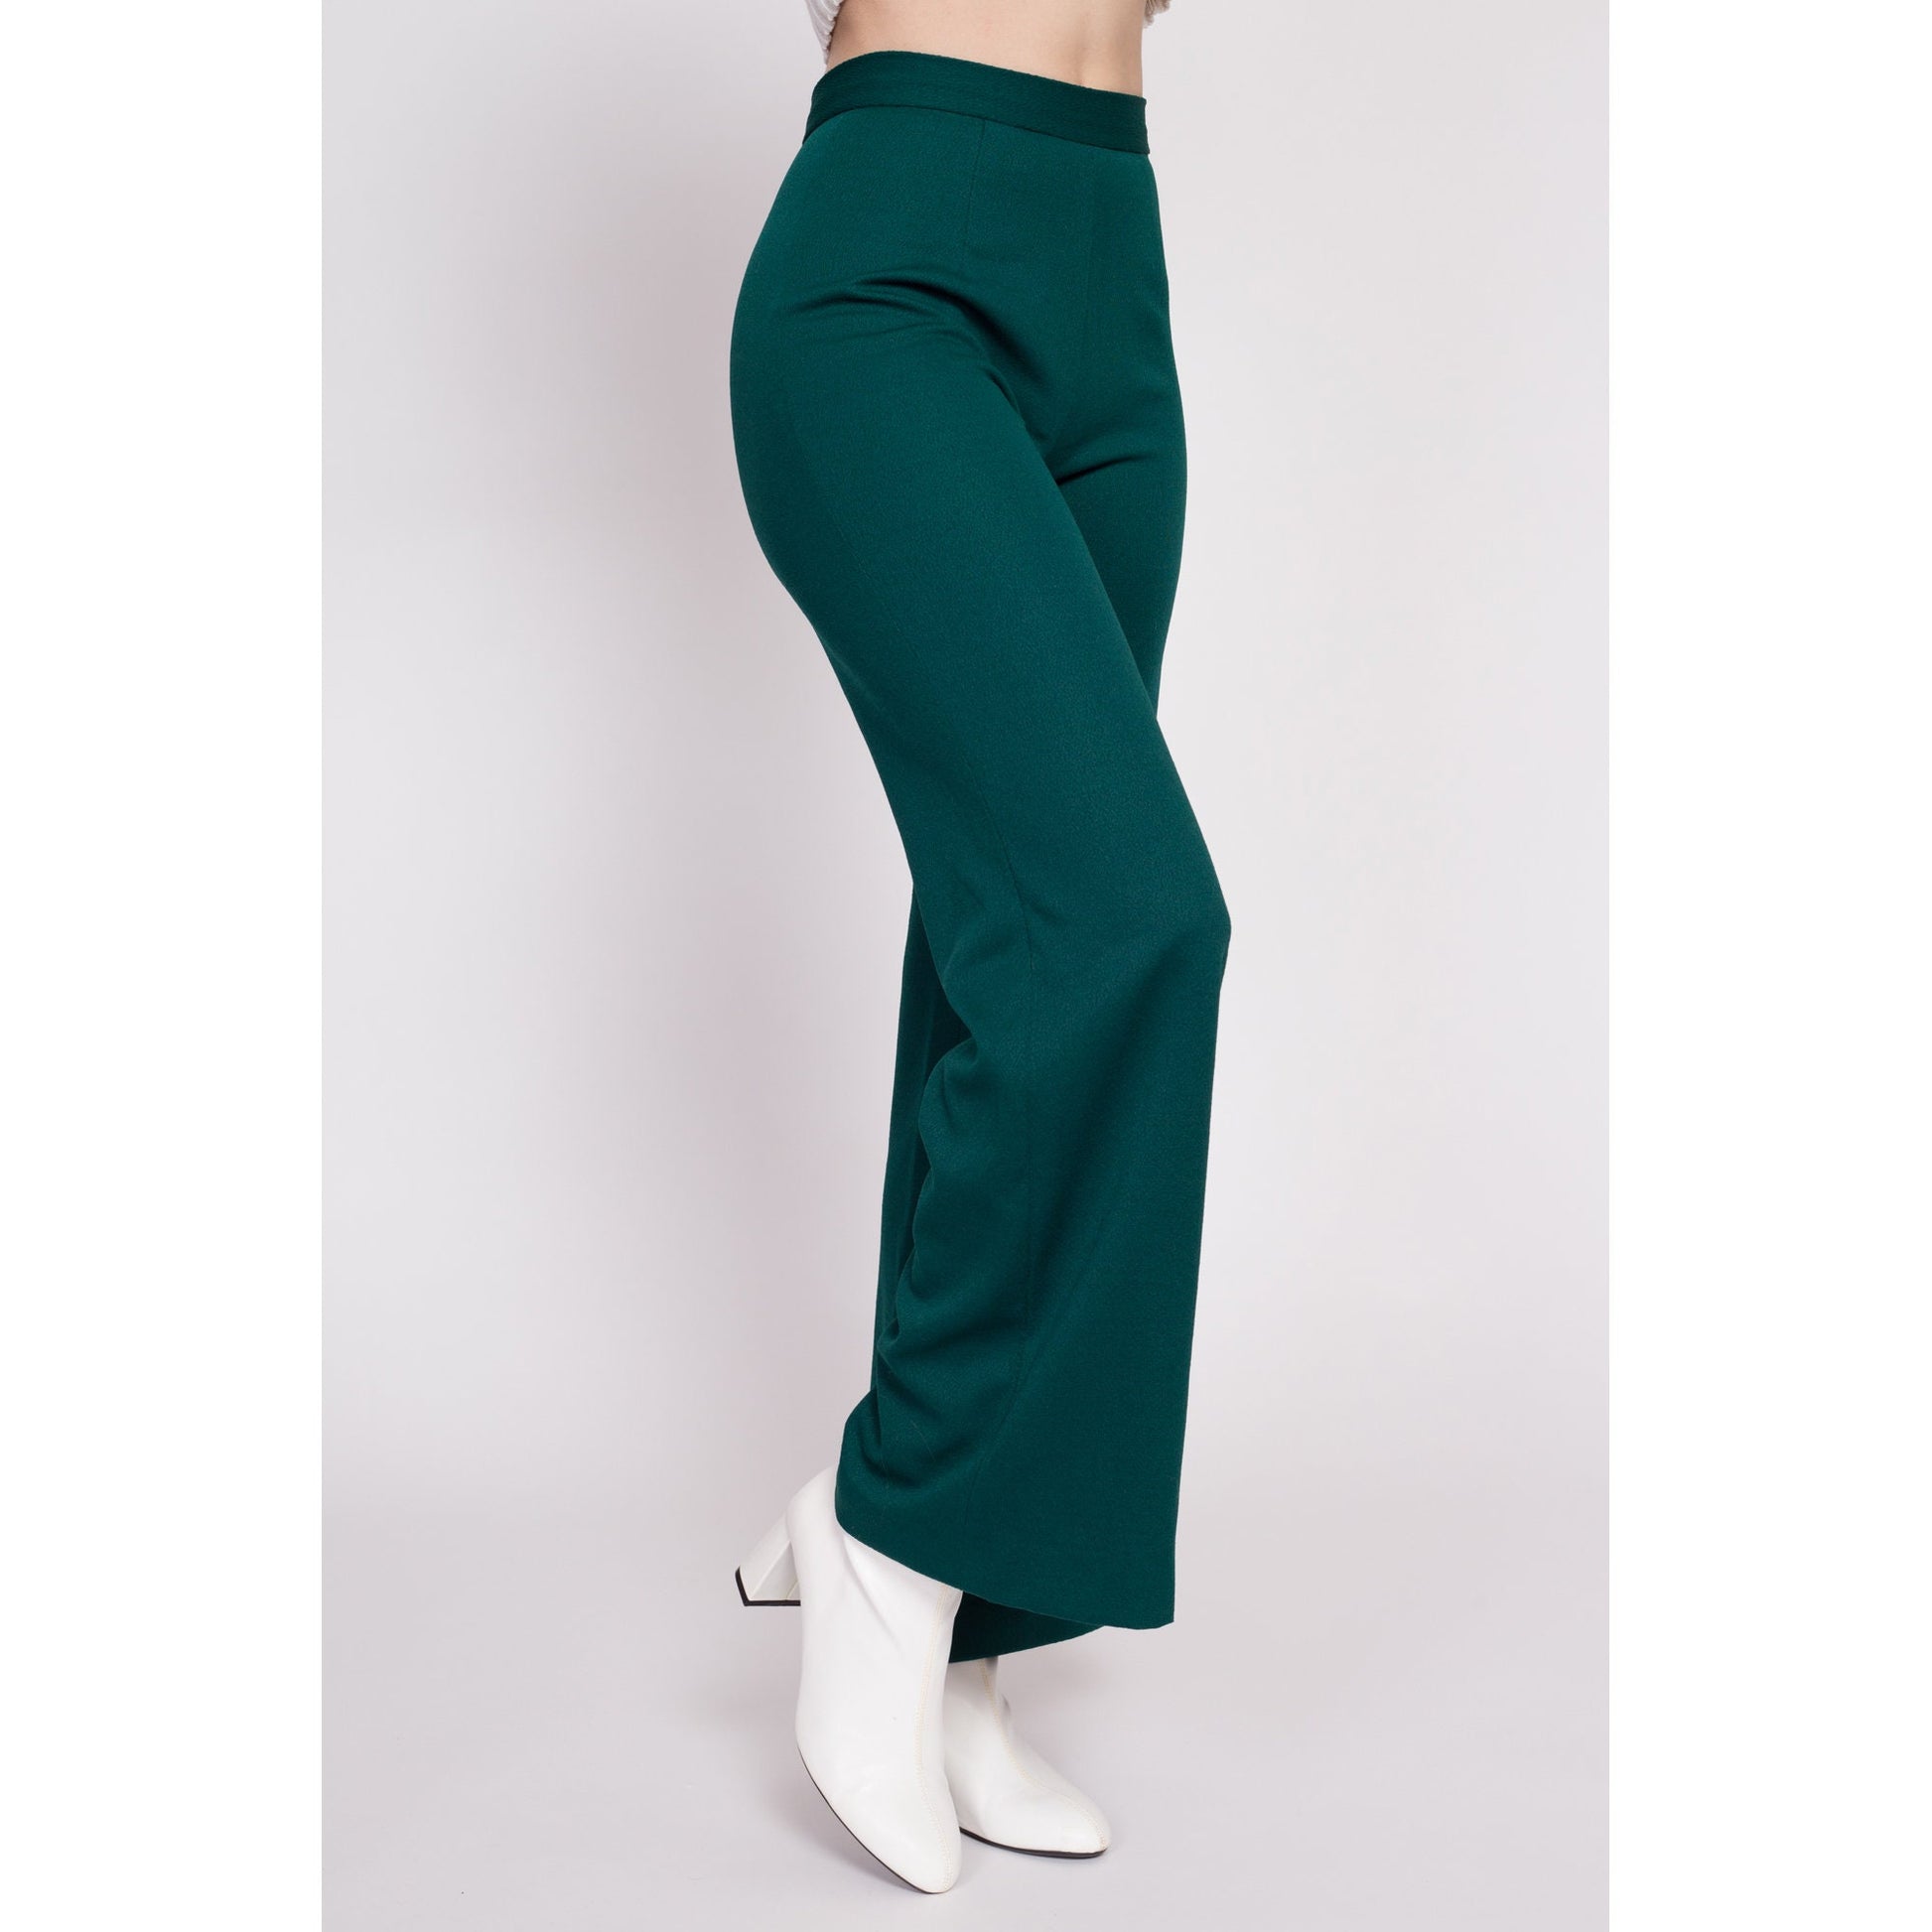 70s Emerald Green Flared Side Zip Pants - Extra Small, 25